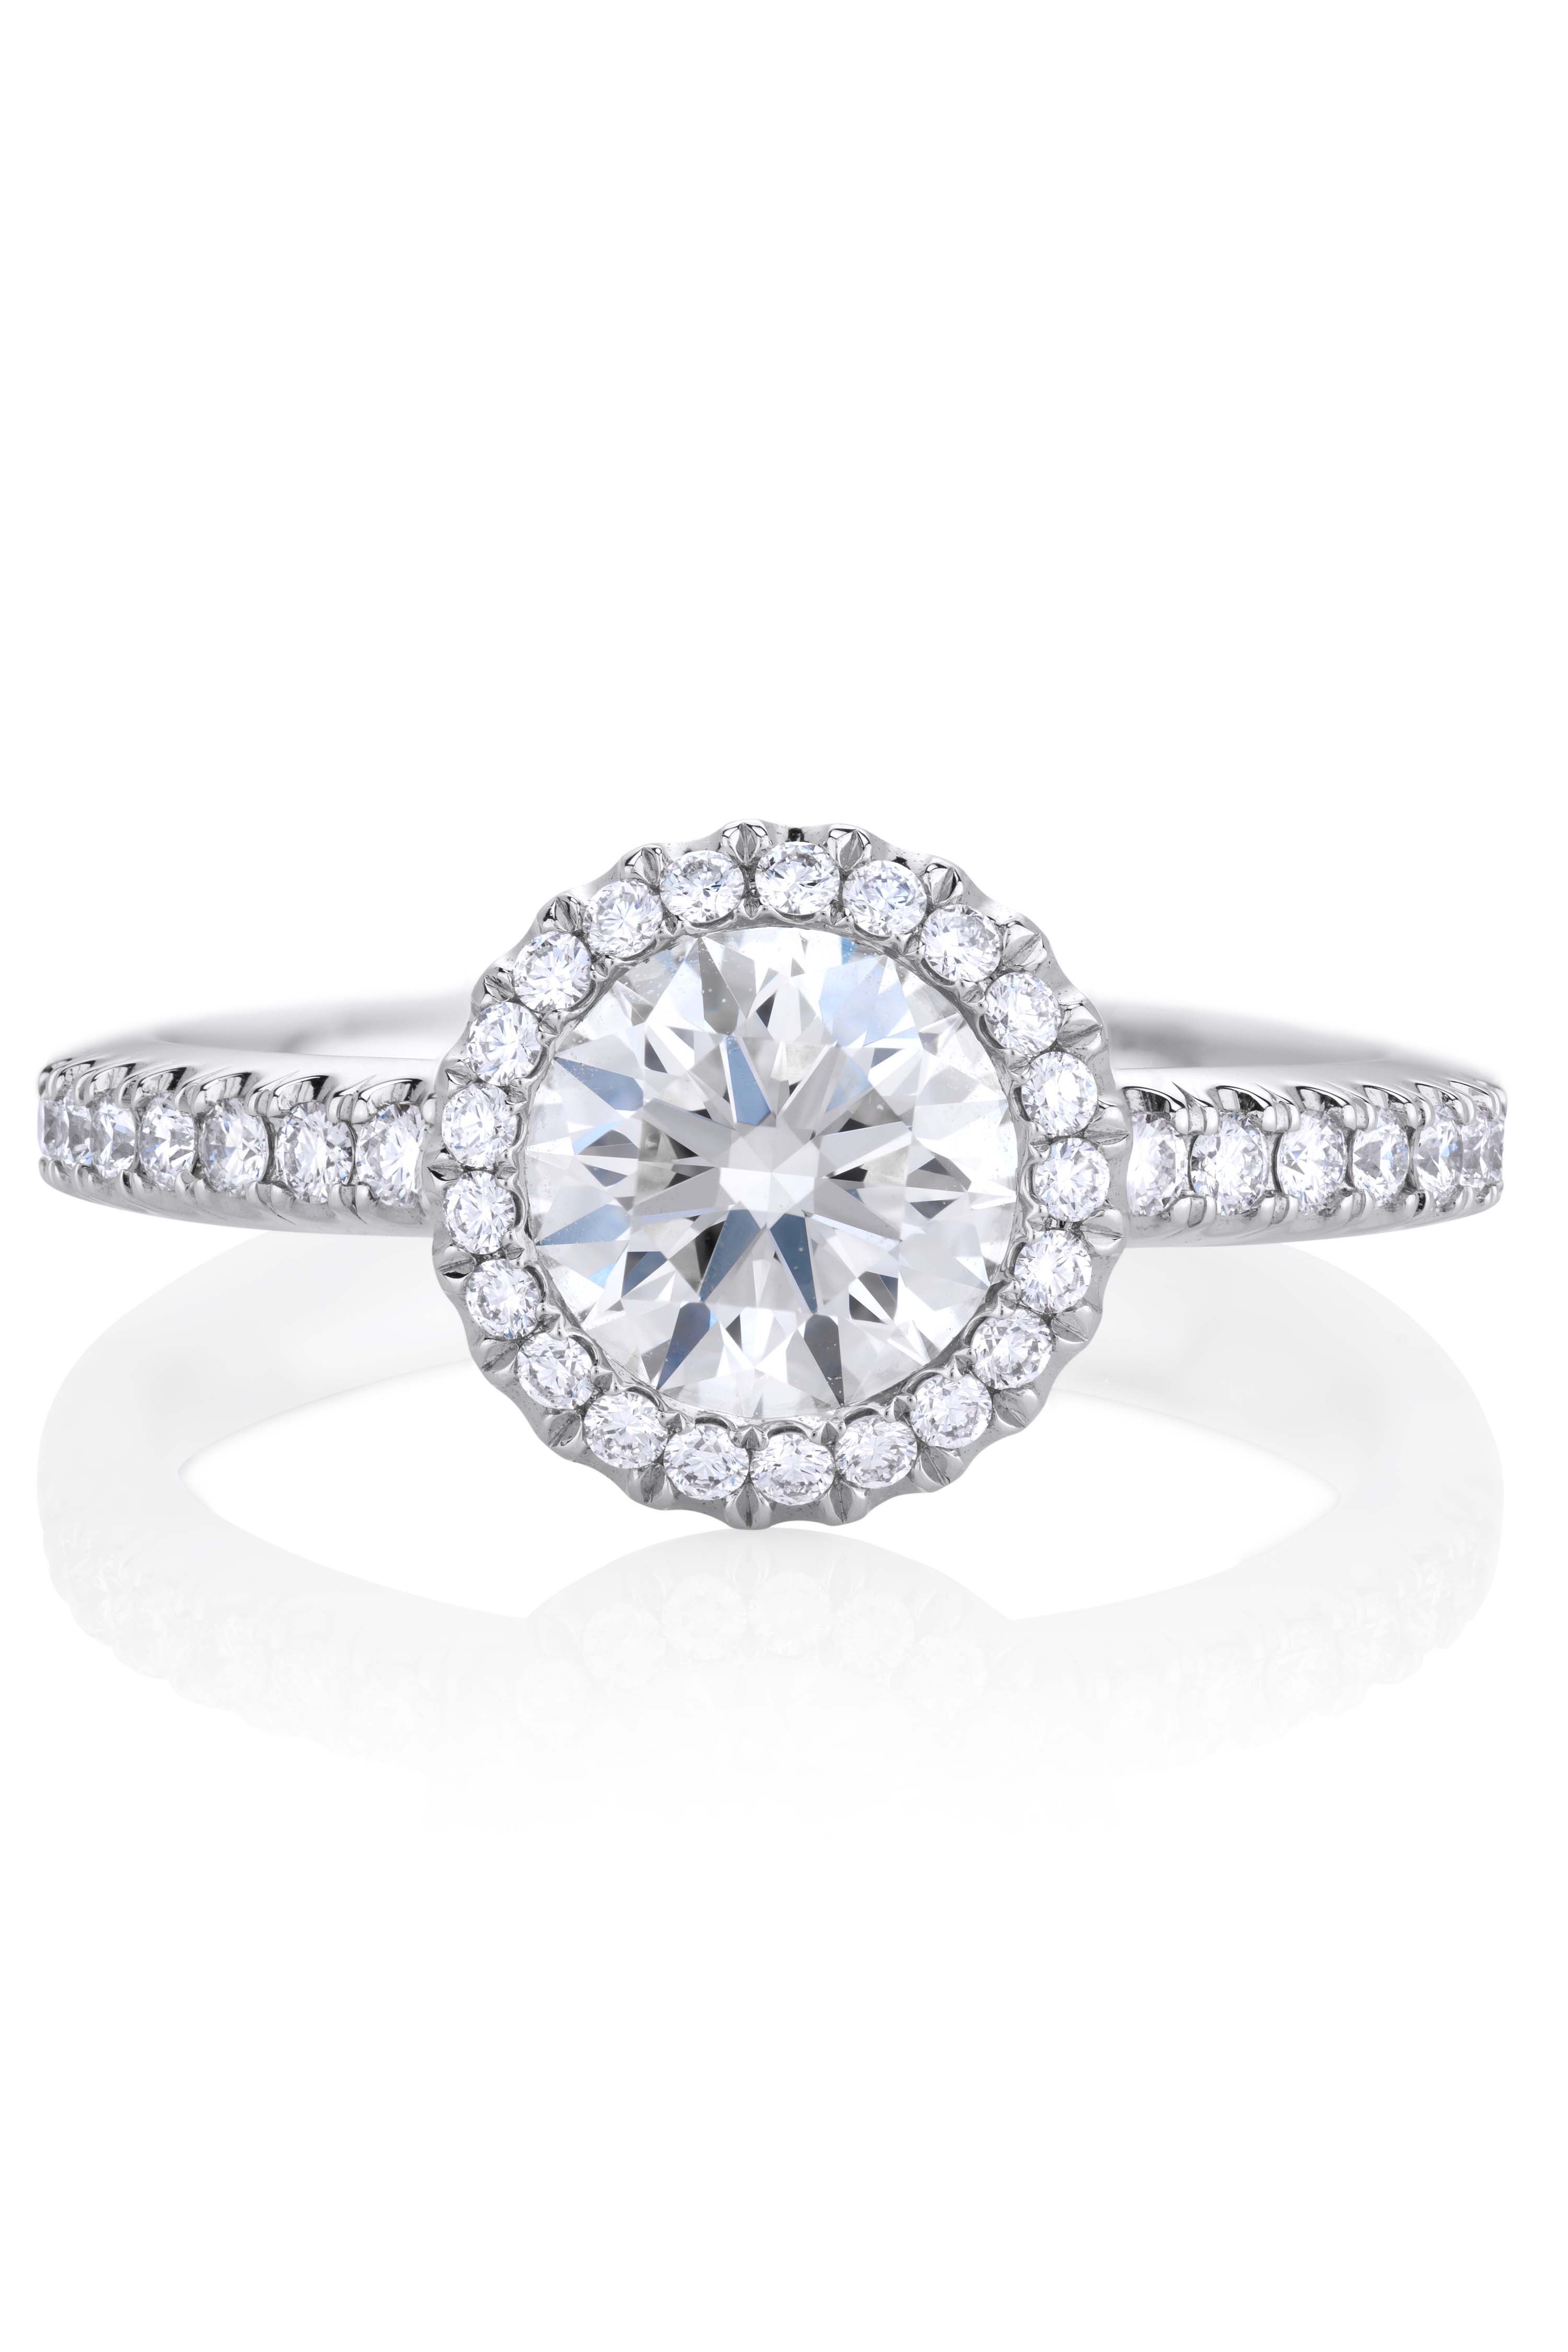 The Most Beautiful Celebrity's Richest Engagement Rings - Gemistone